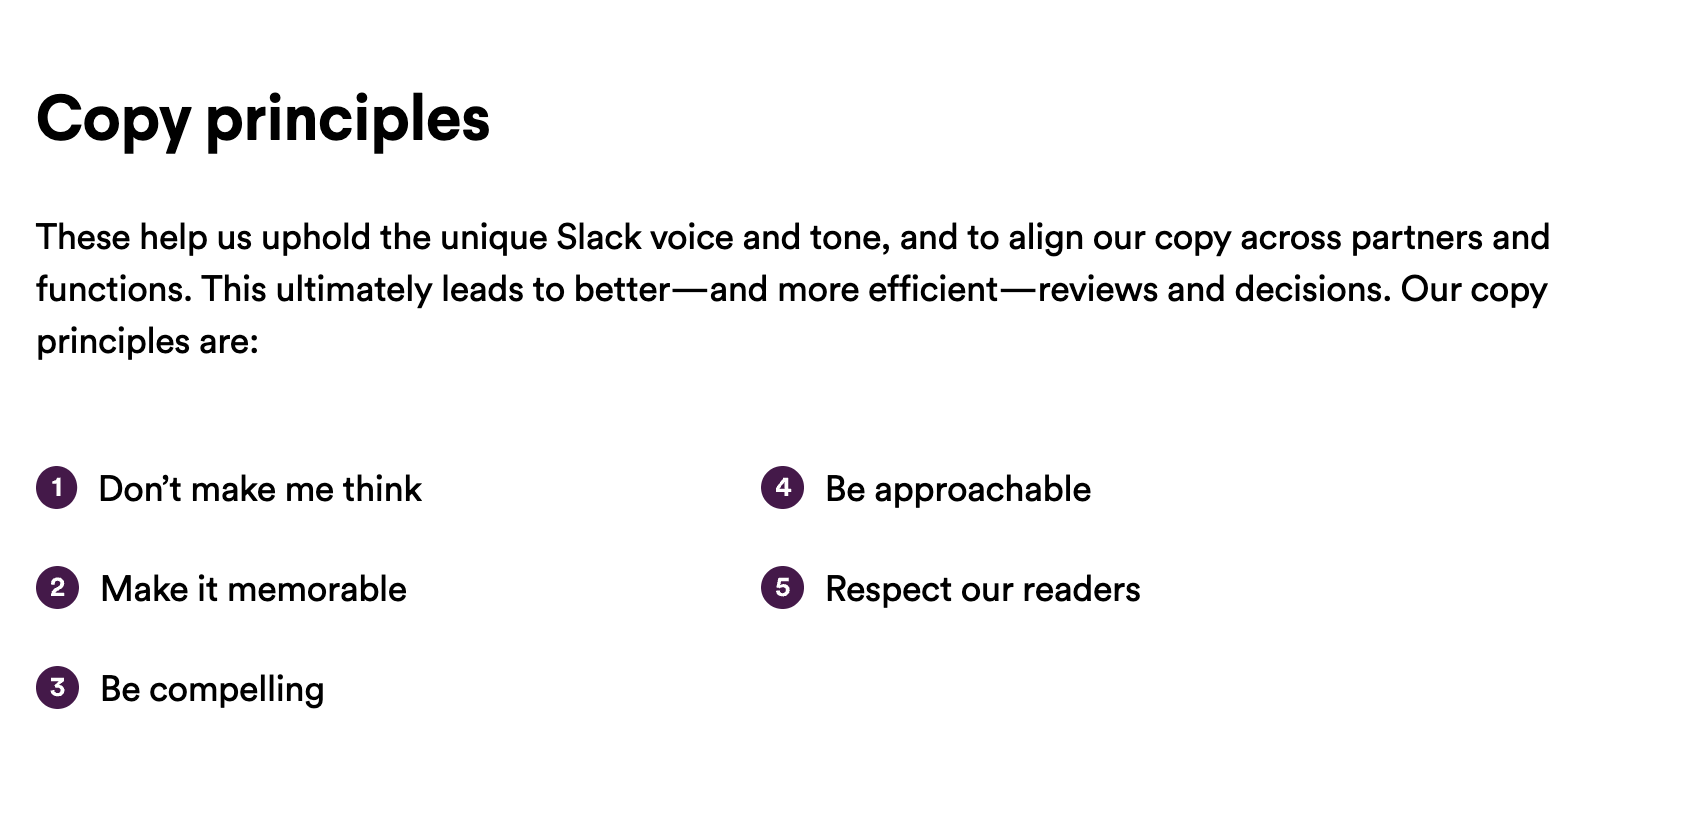 Slack's copy principles, which include: Don't make me think, make it memorable, be compelling, be approachable and respect our readers. 